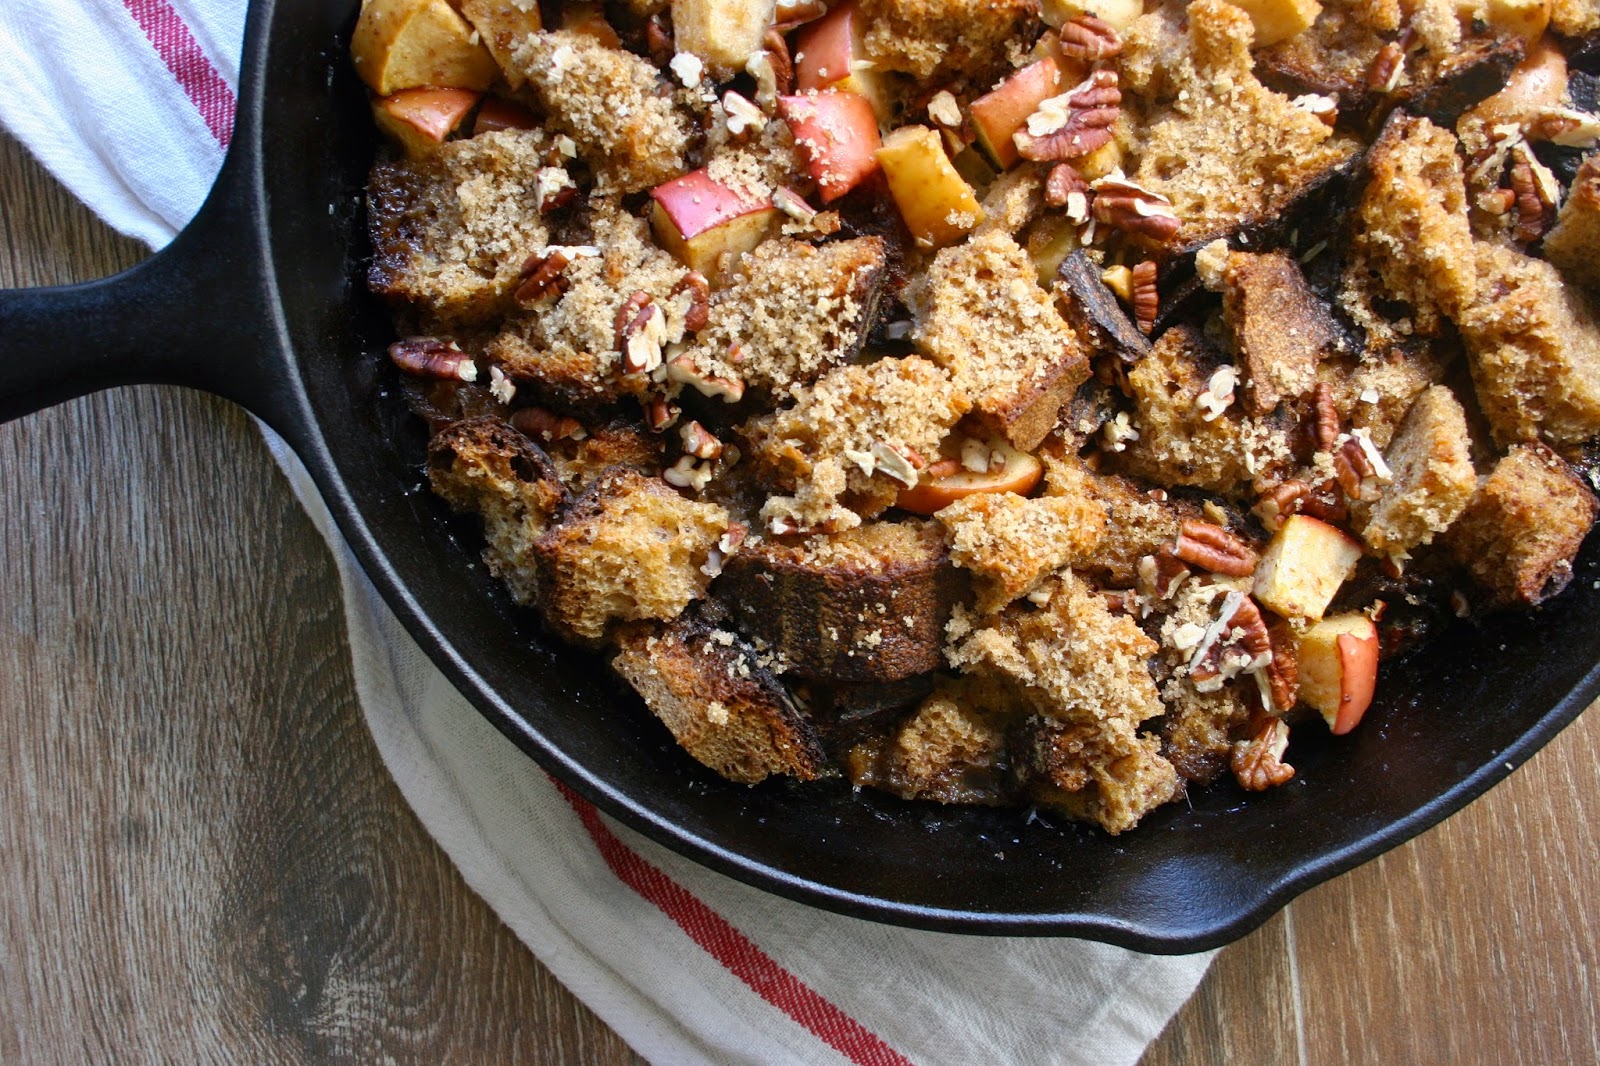 Whole Grain Bread Pudding with Apples & Pecan Streusel in Cast Iron Skillet